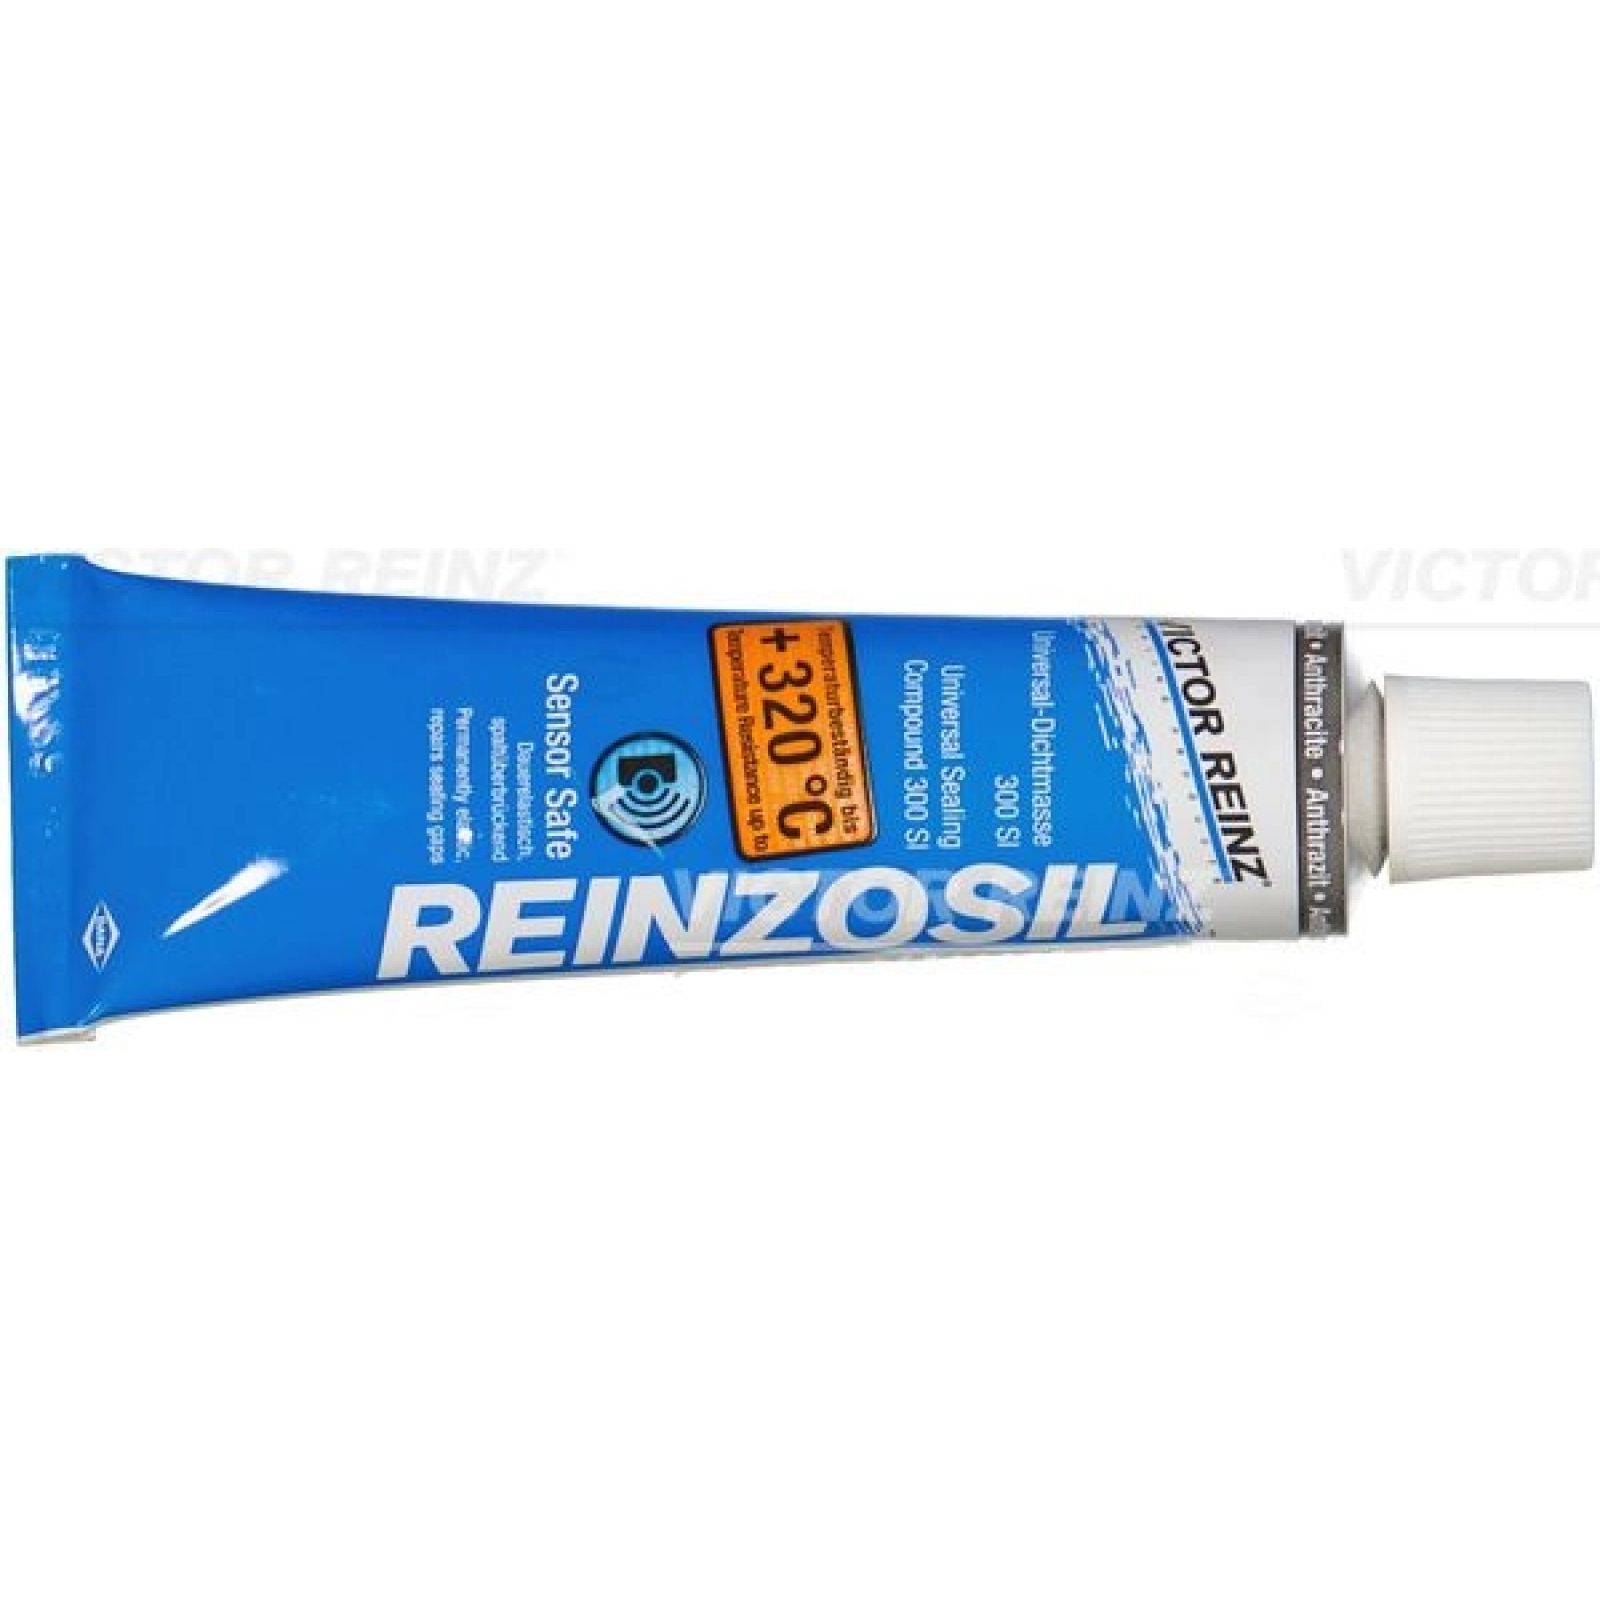 https://www.autoteile-store.at/img/product/reinz-reinzosil-dichtmasse-300si-tube-70ml-silikonanthrvpe25-70-31414-10-227620/1a6e120fae6a59622cc2236a72059360_1600.jpg